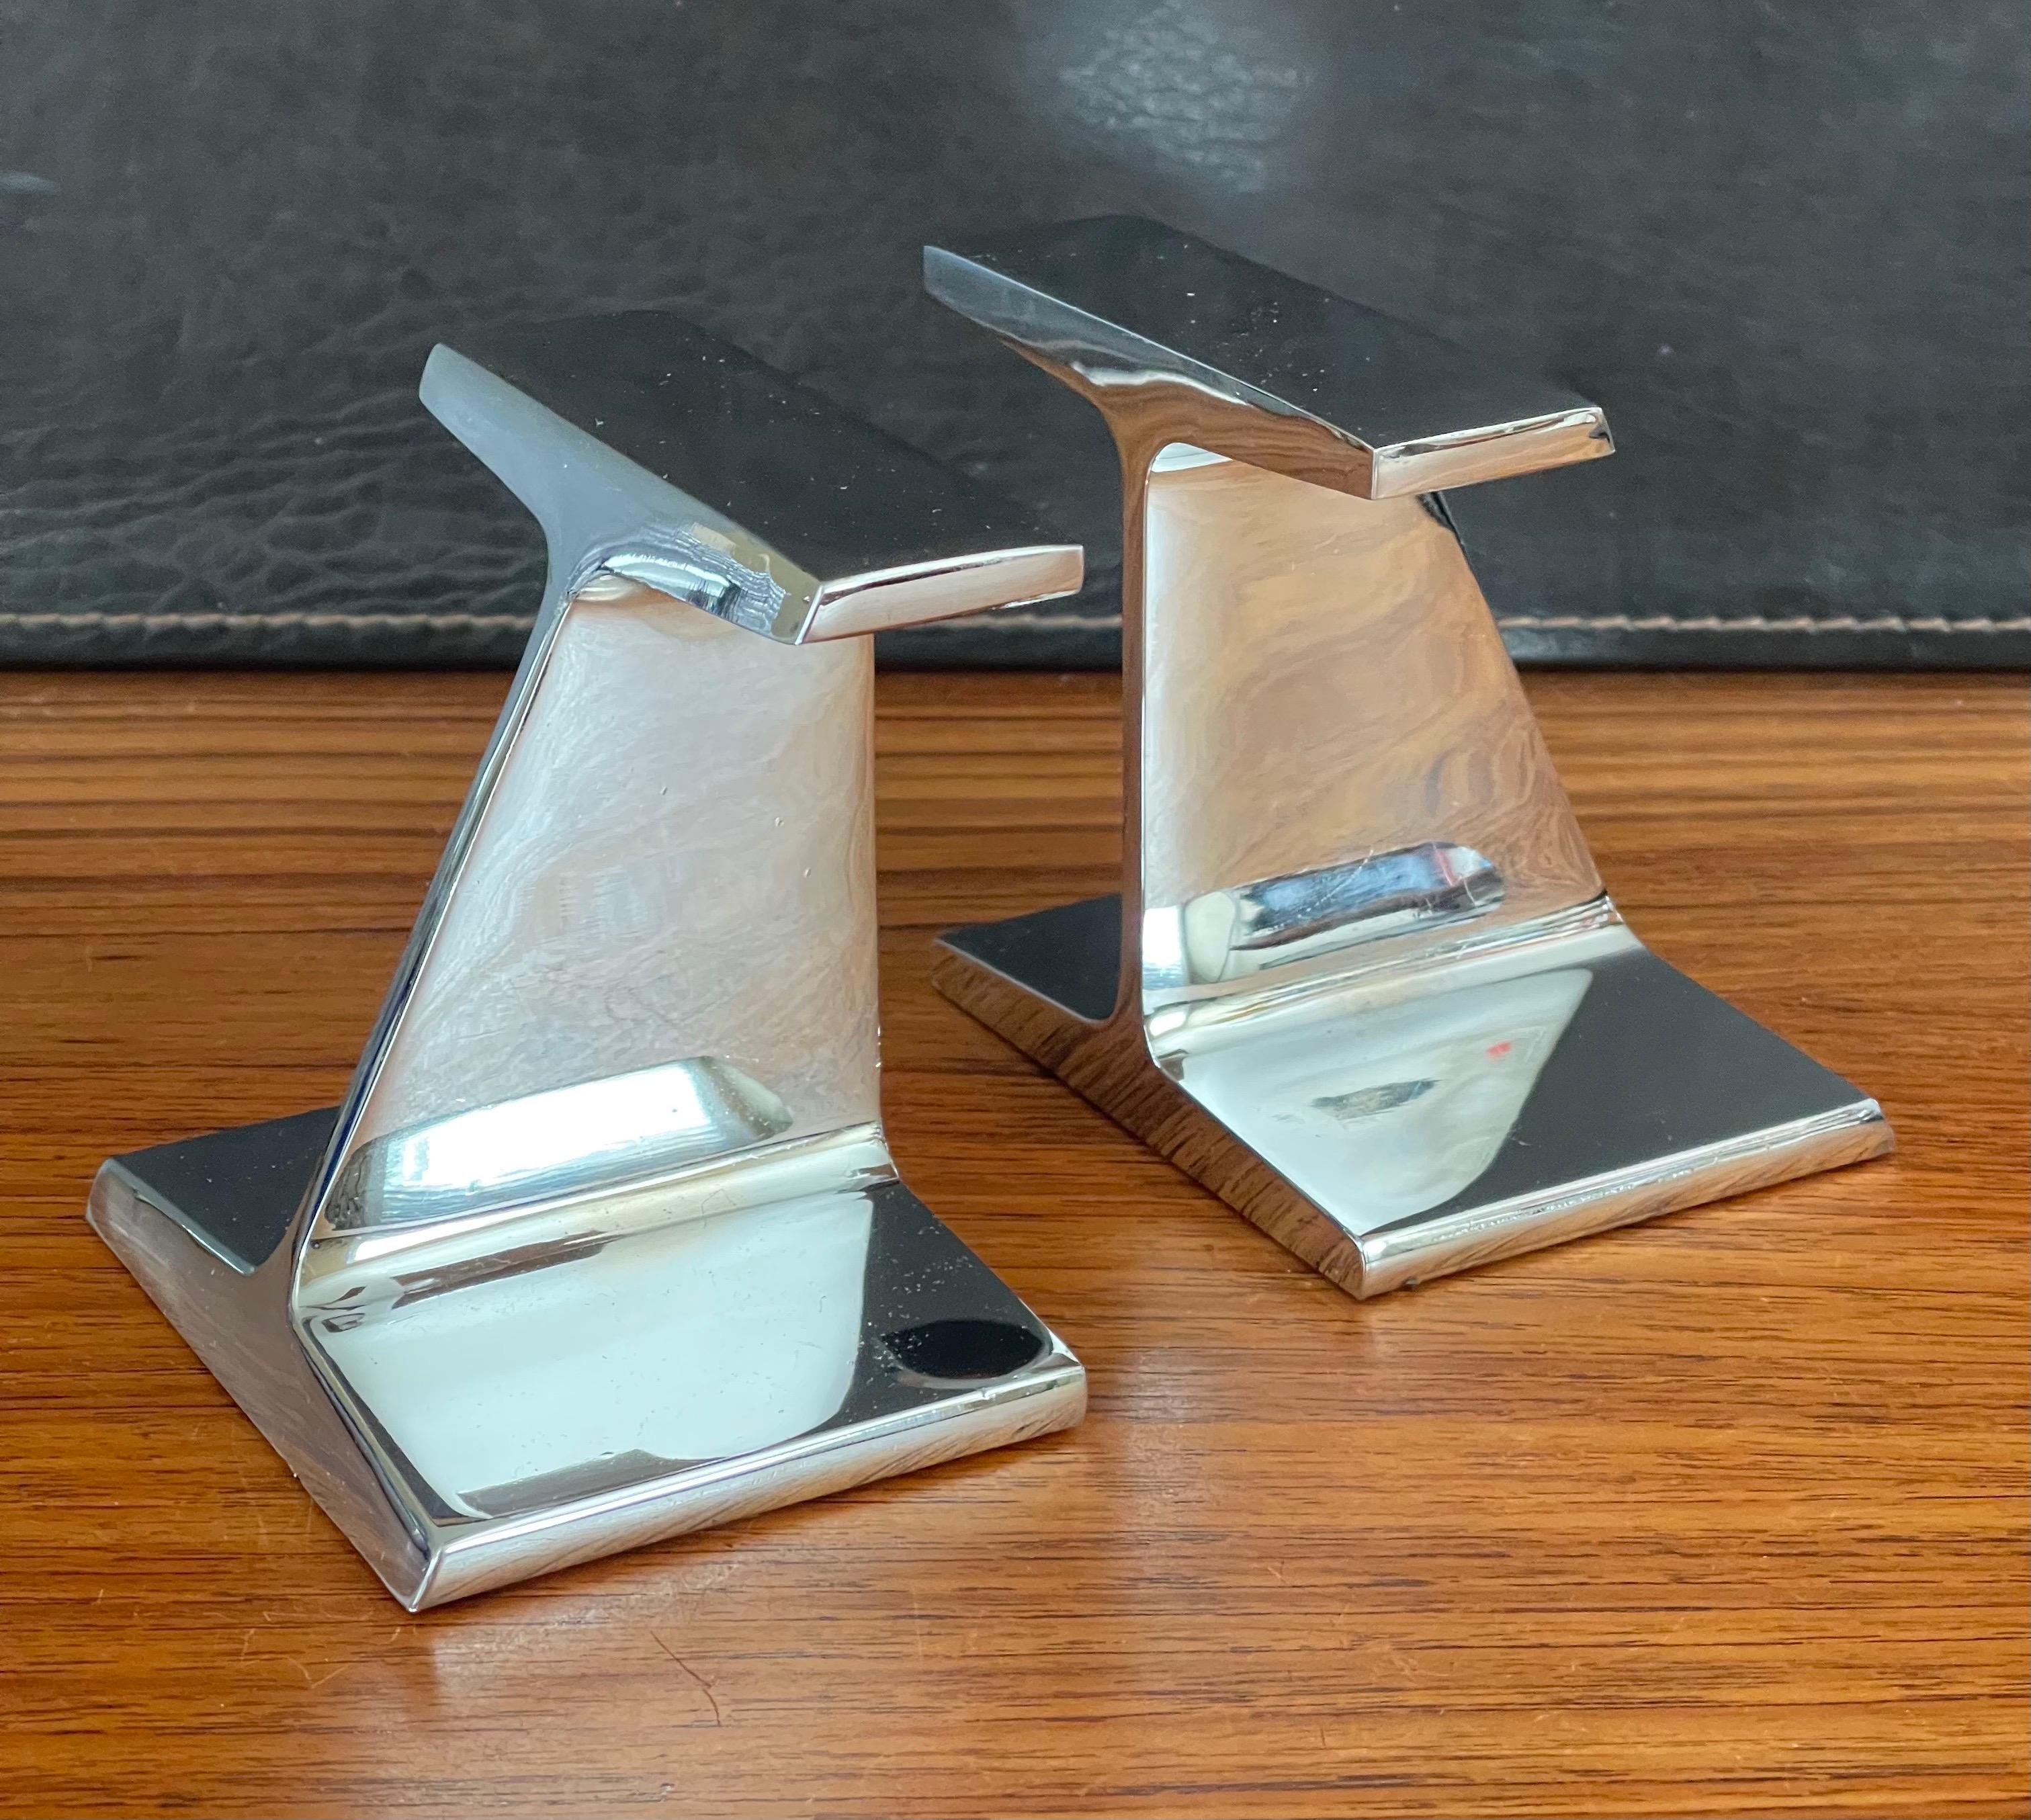 American Pair of Modernist Chromed Steel I-Beam Bookends by Bill Curry for Design Line